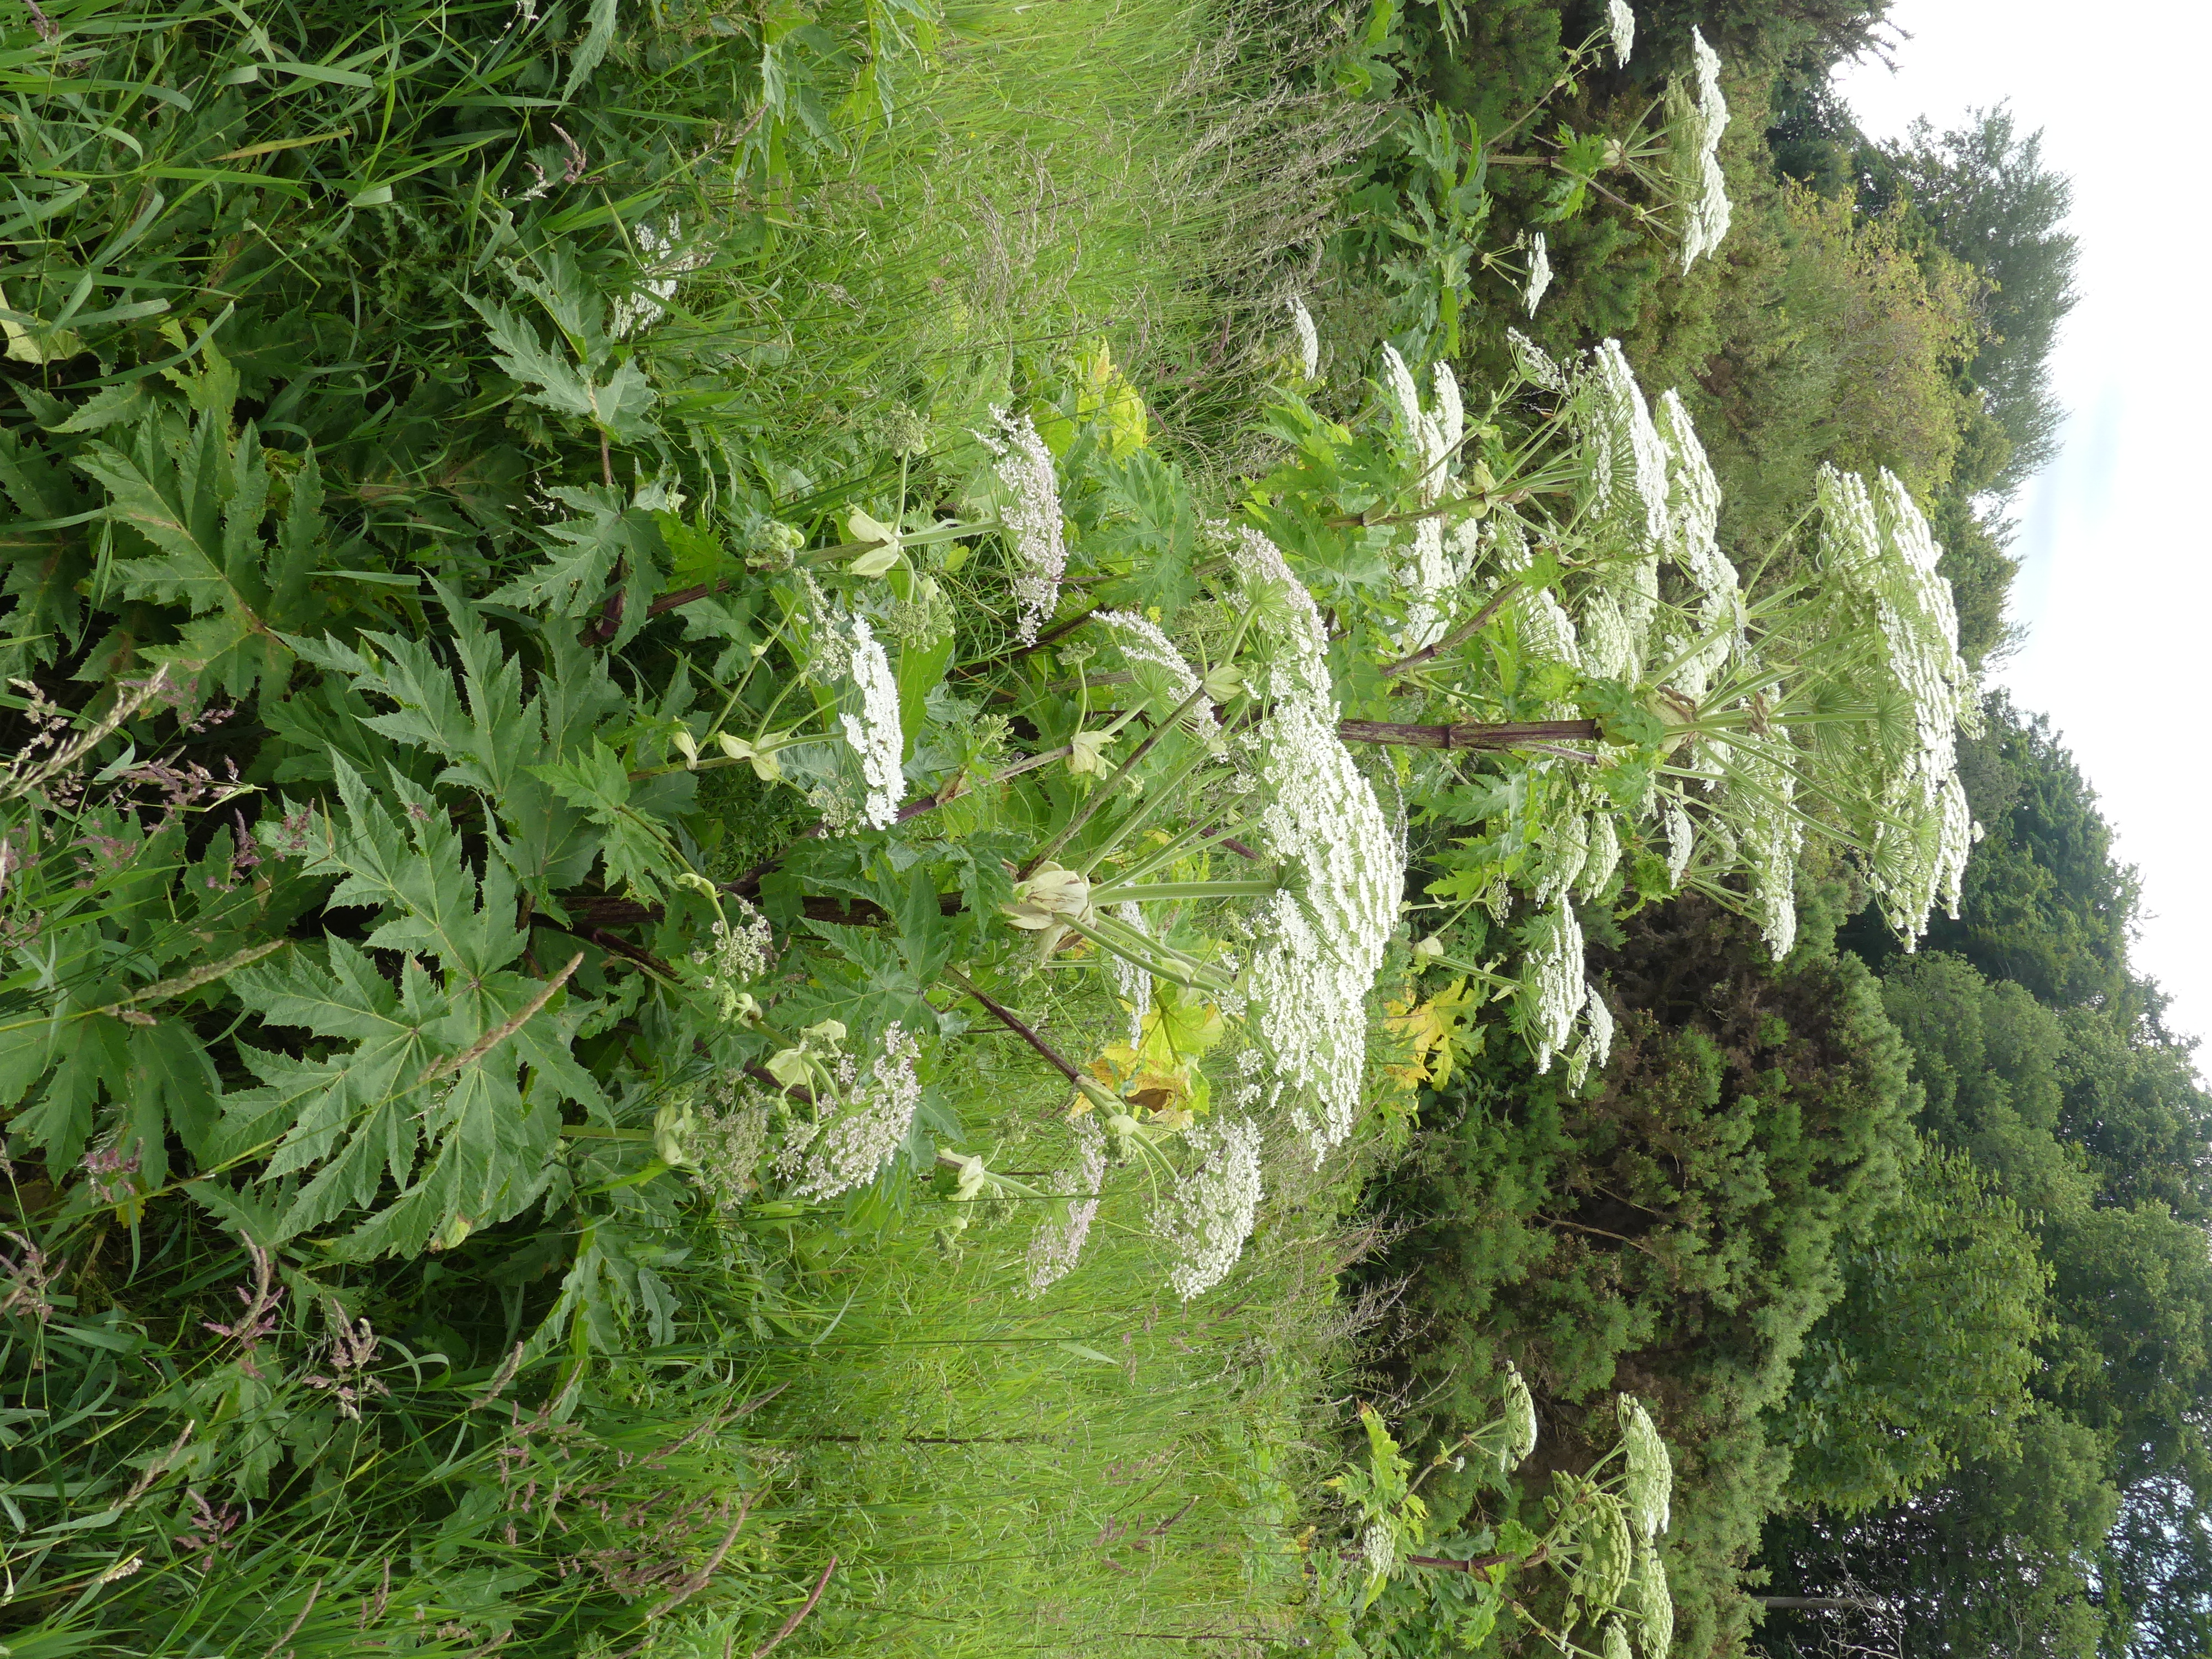 Giant hogweed in flower - flowers large, white and umbrella shaped